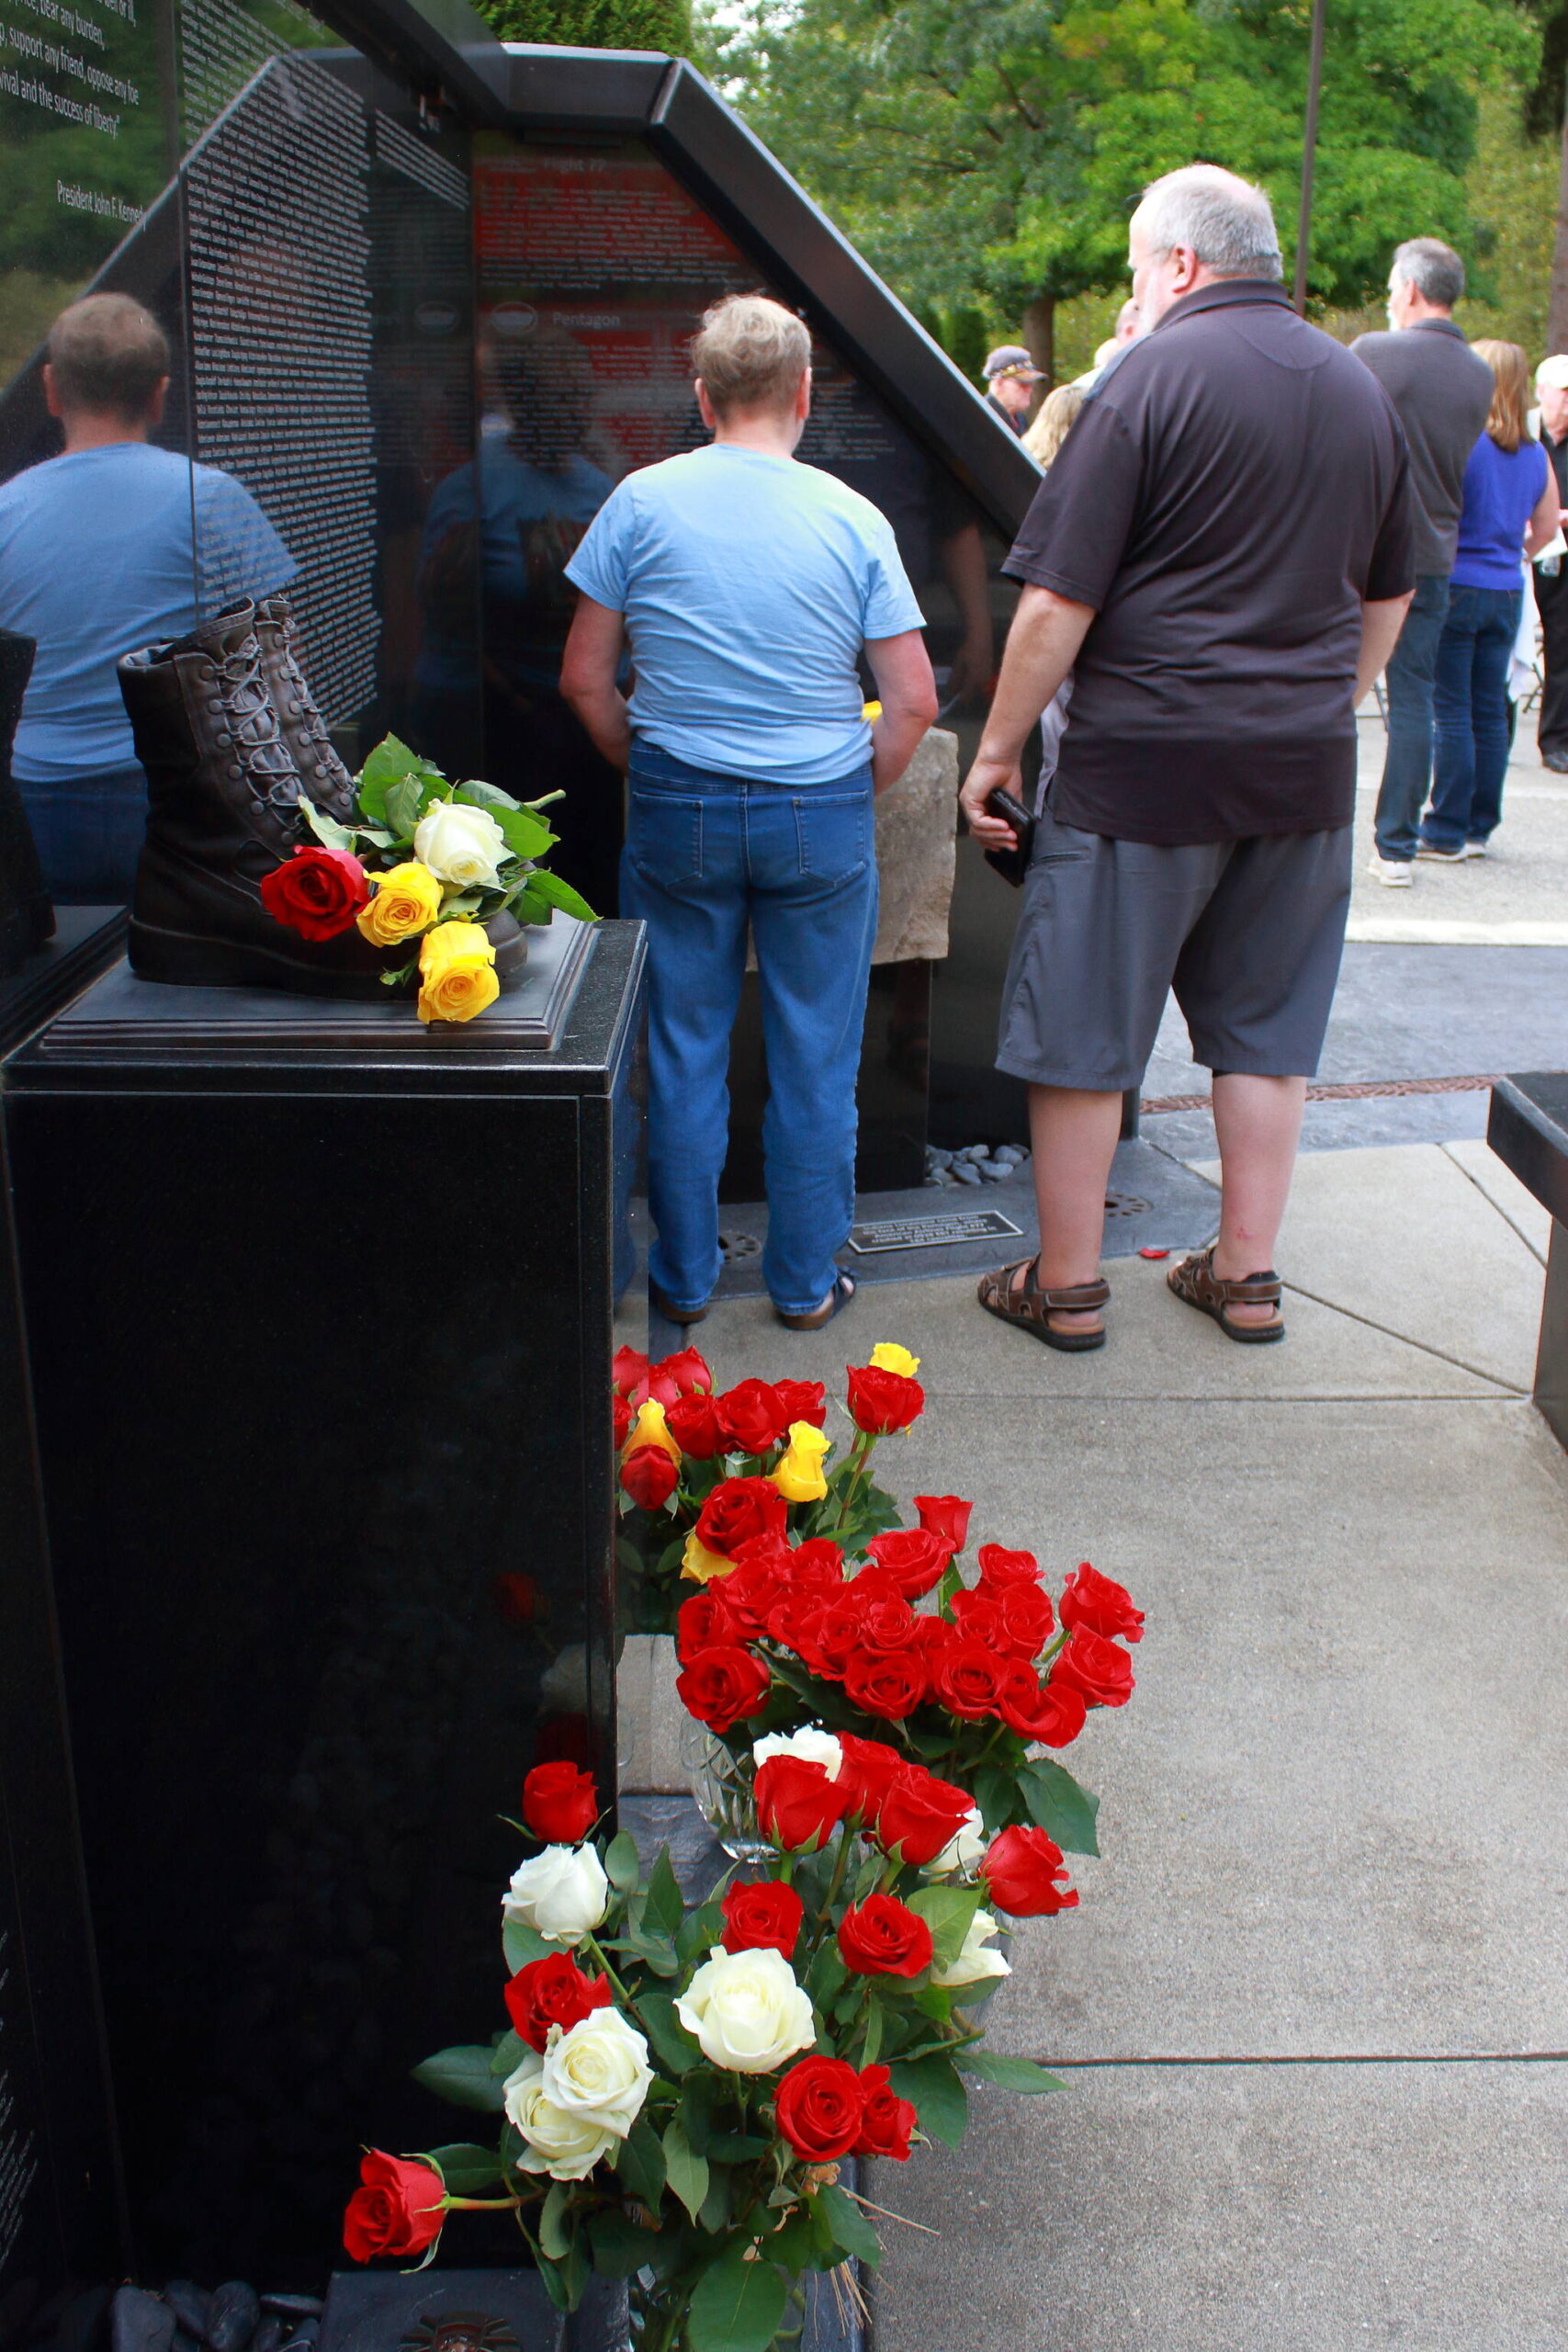 Community members view the permanant memorial display at Fire Station 64. Photo by Keelin Everly-Lang / The Mirror